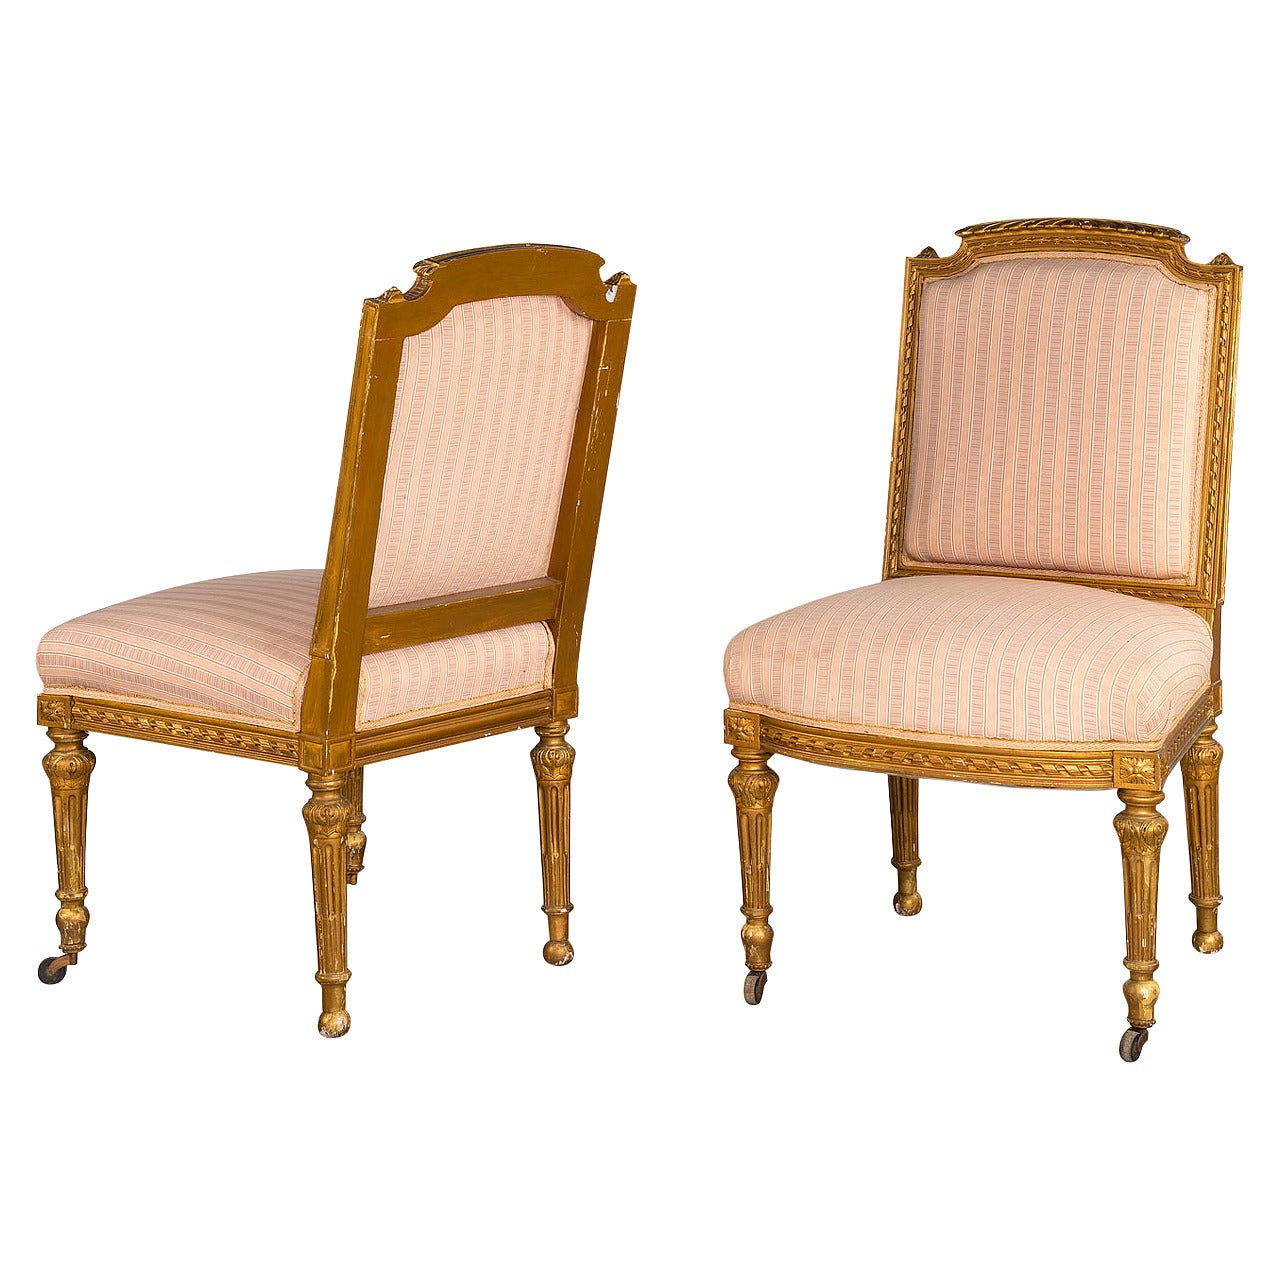 Pair of Early 20th Century Giltwood Single Chairs